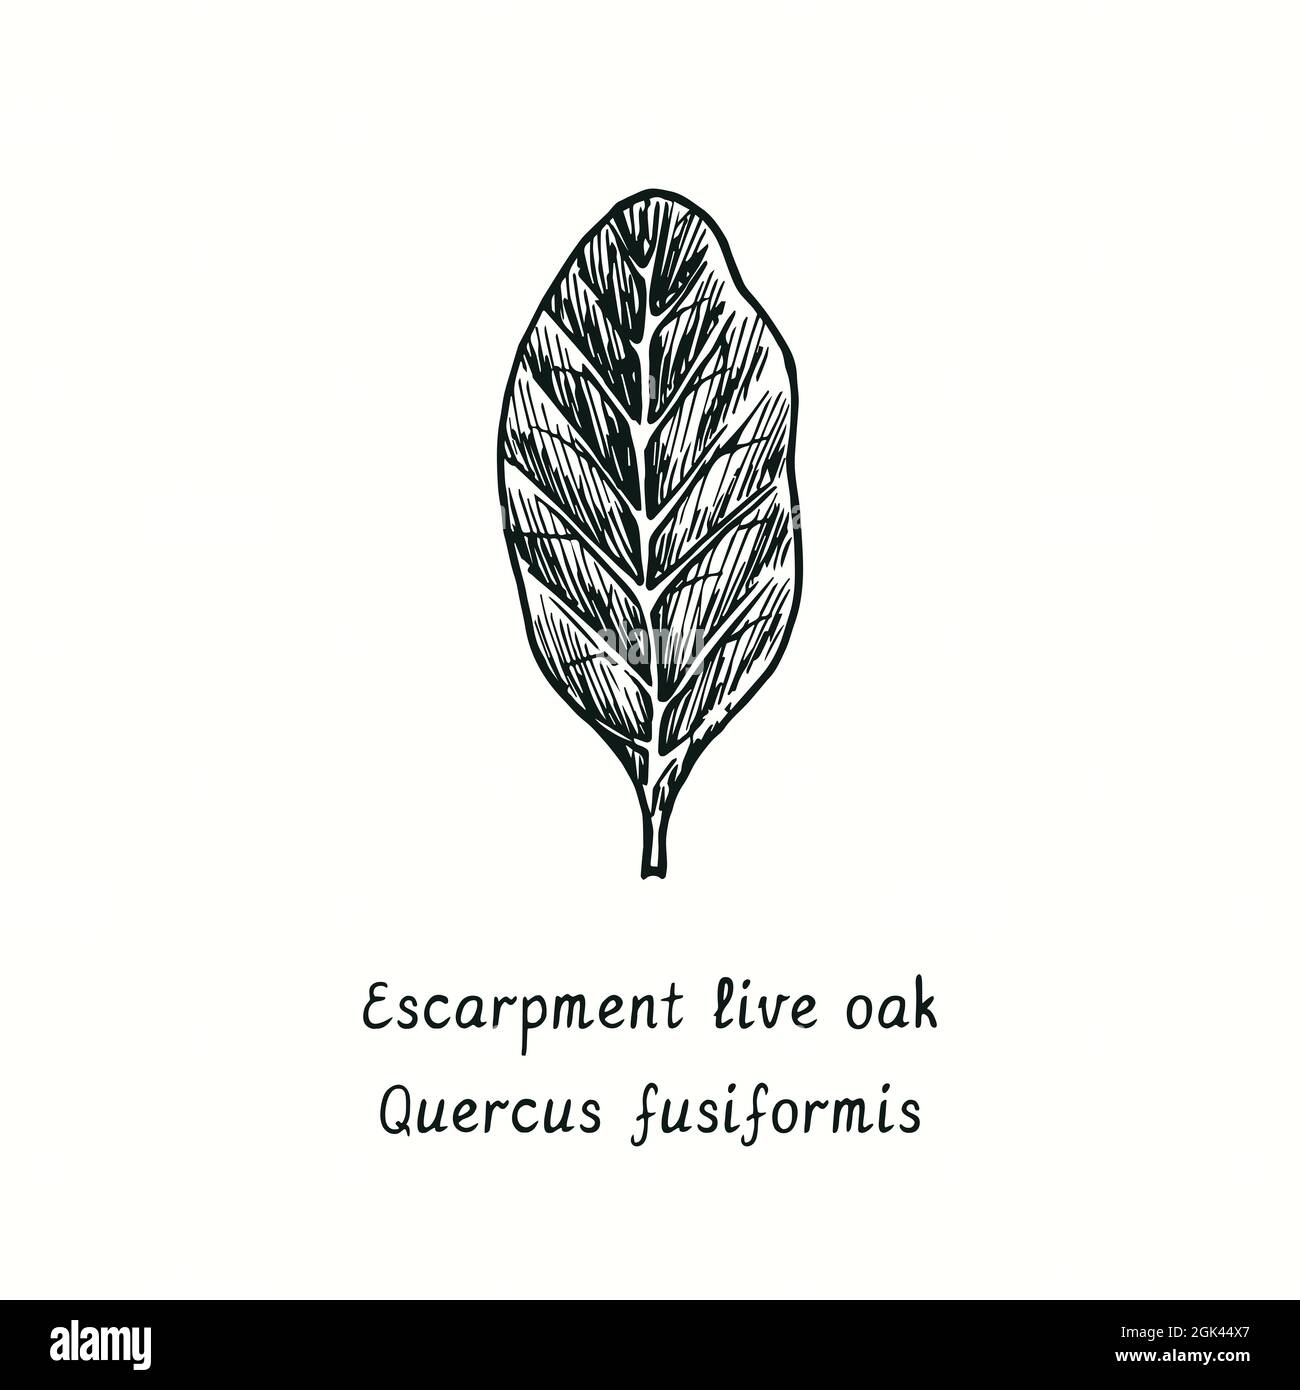 Escarpment live oak (Quercus fusiformis) leaf. Ink black and white doodle drawing in woodcut style. Stock Photo